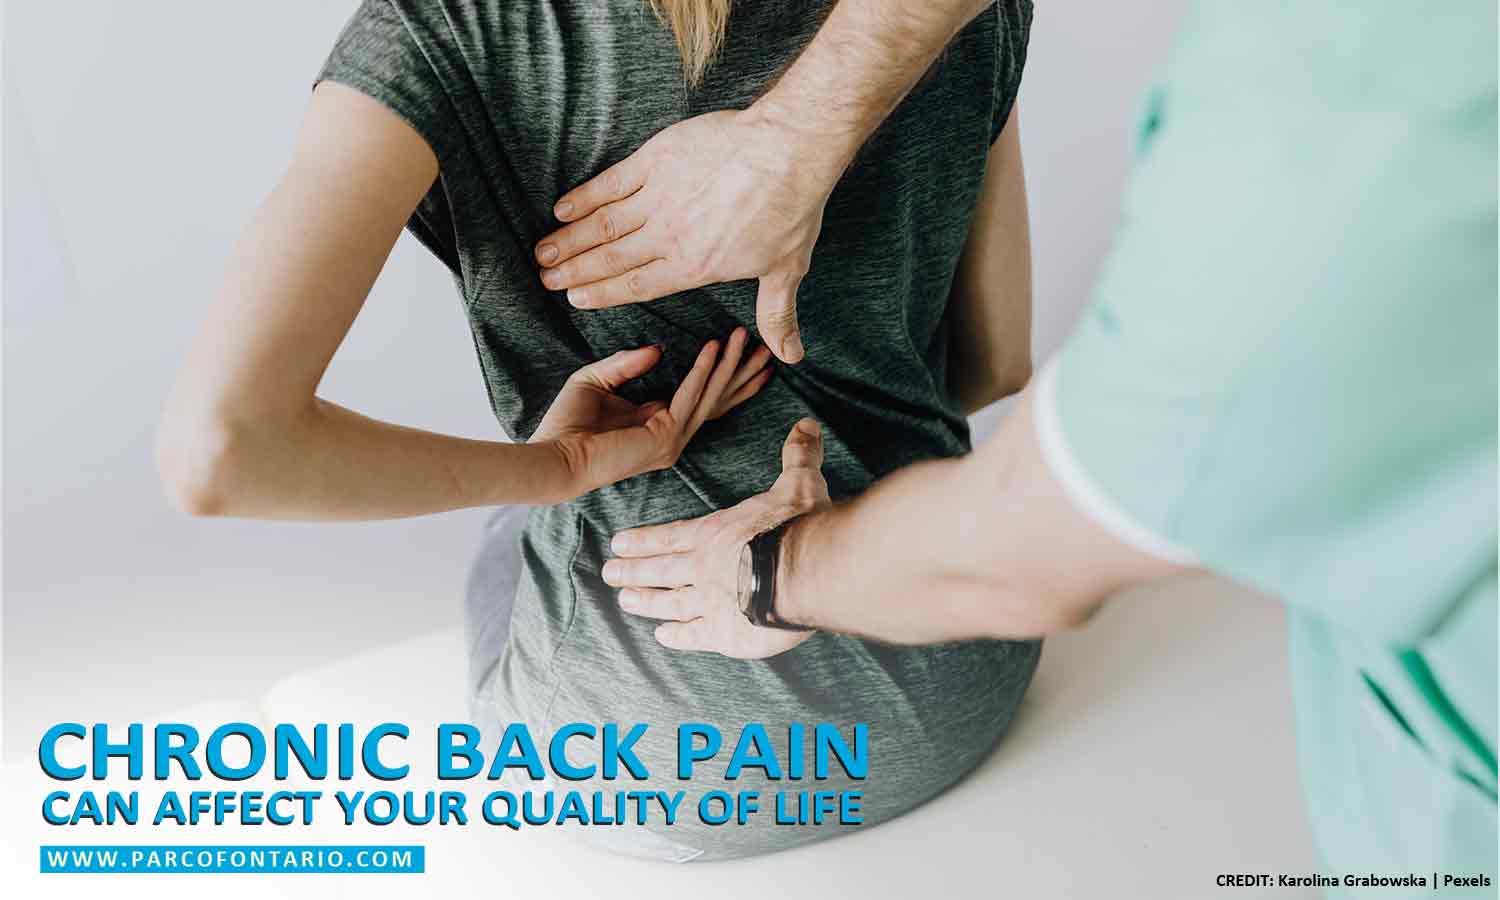  Chronic back pain can affect